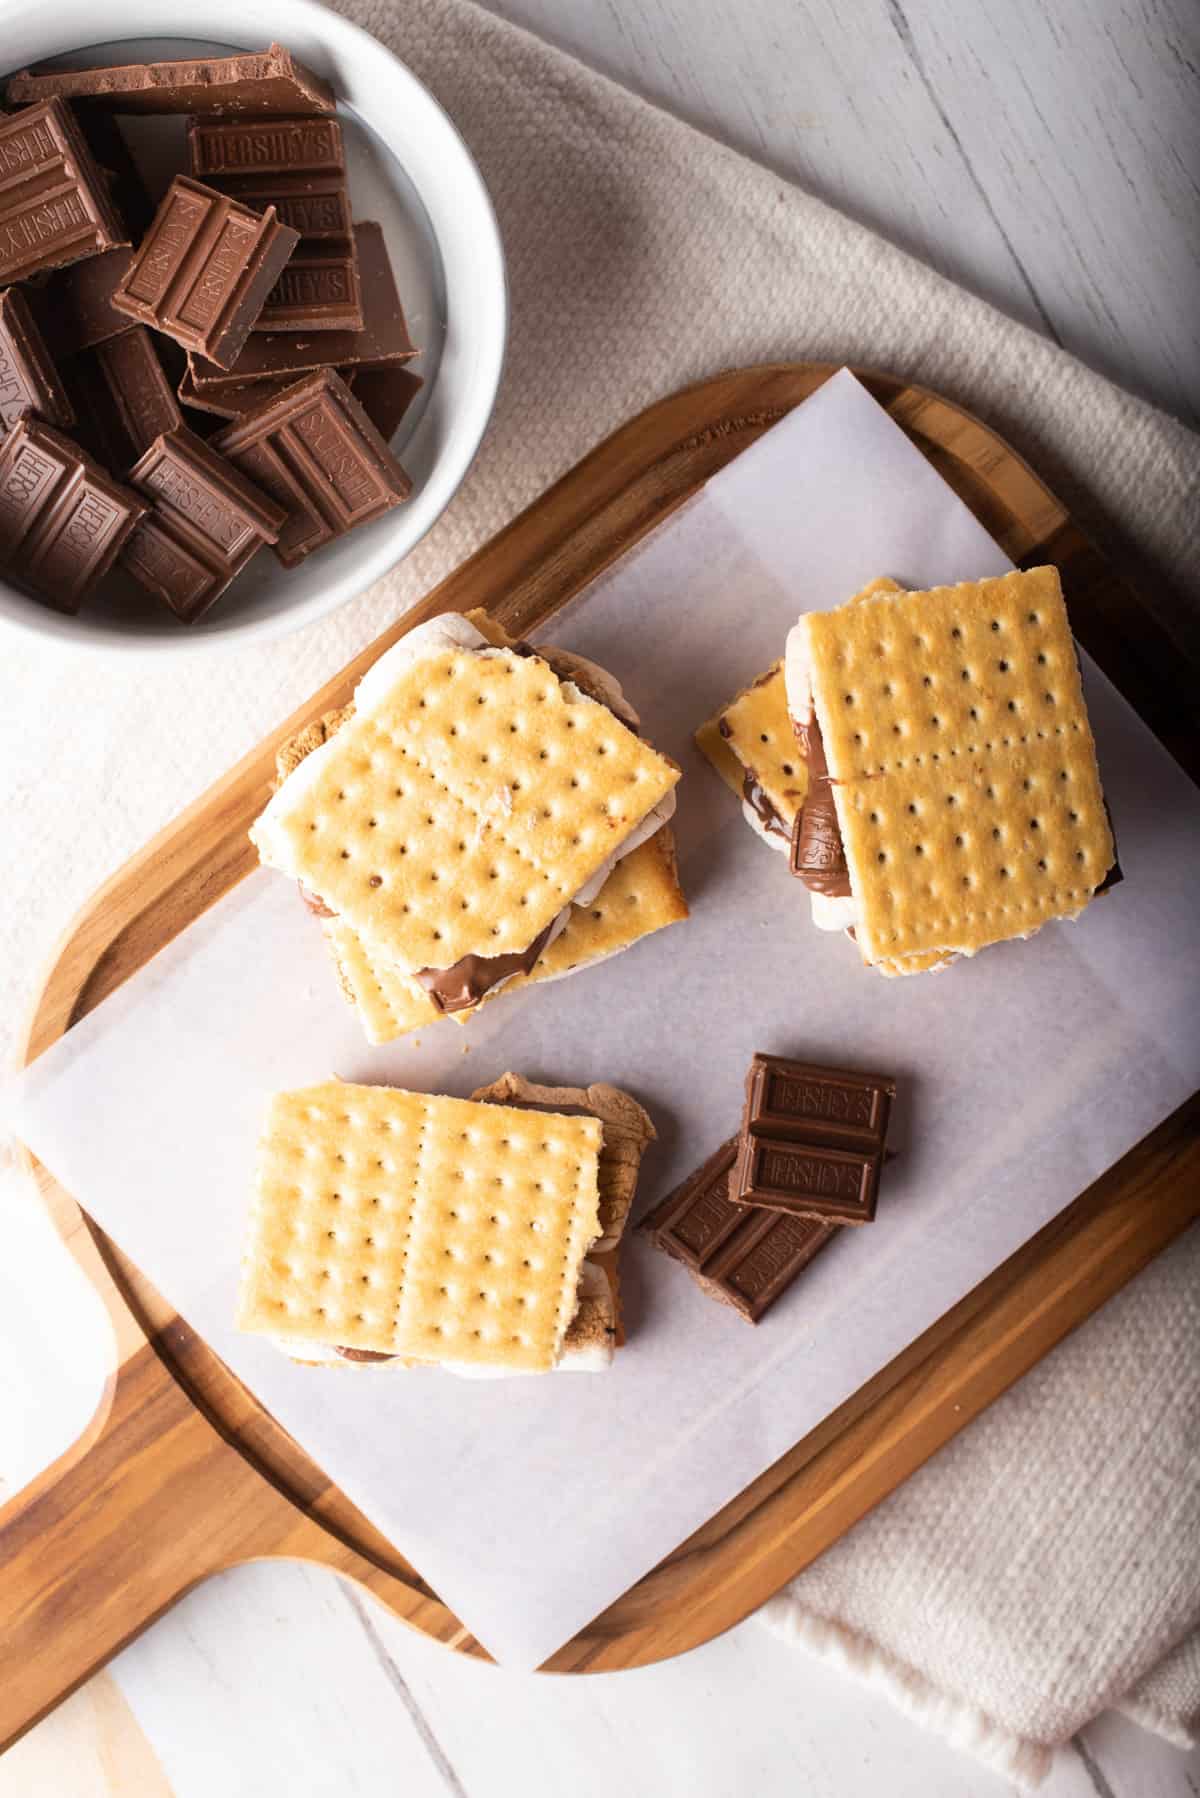 Overhead view of three air-fried s'mores placed on a wooden board next to a bowl of chocolate pieces.